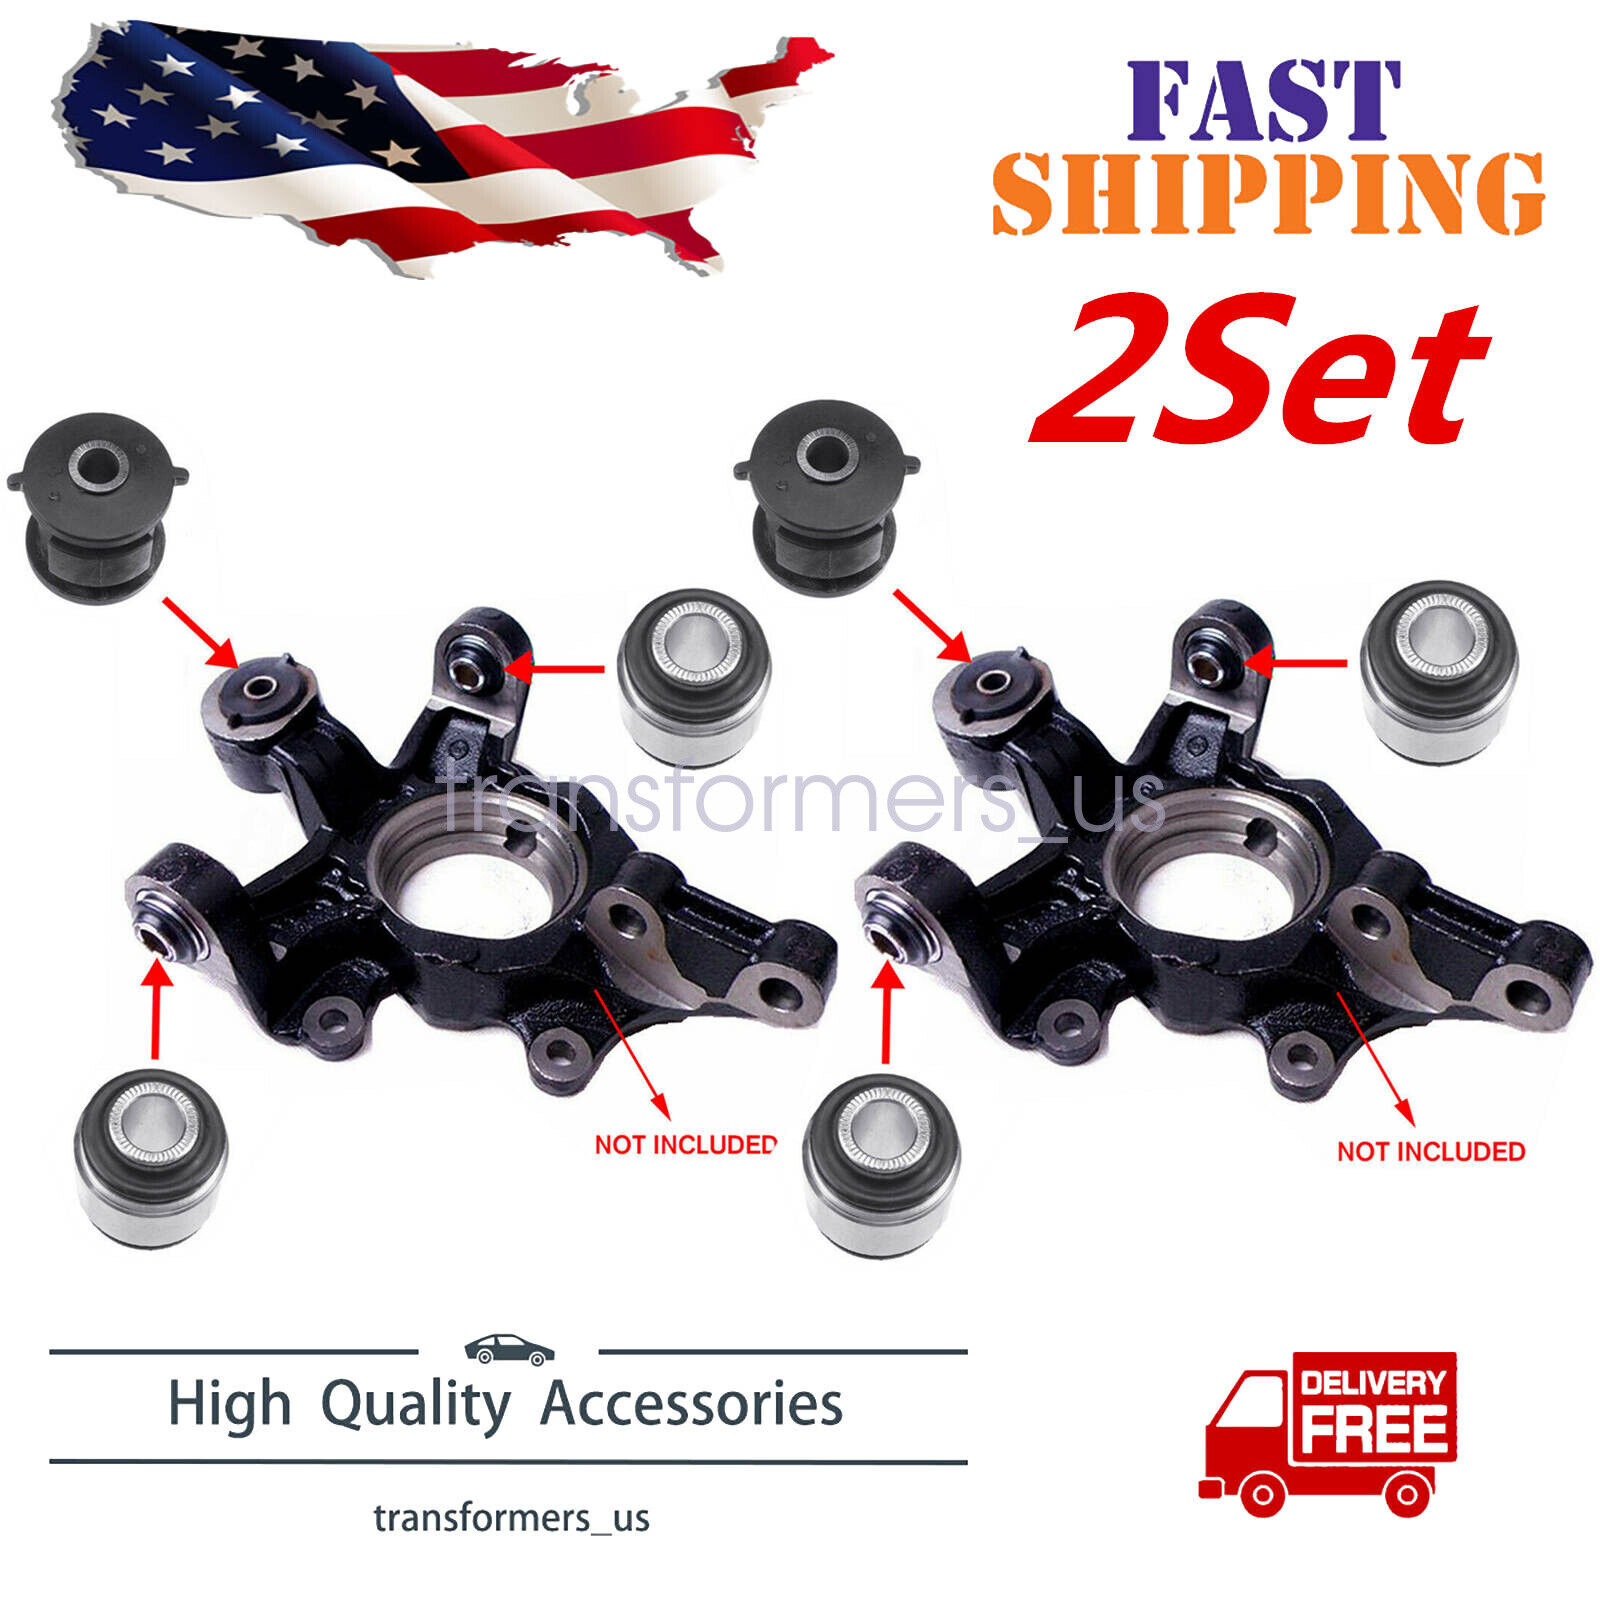 2 Sets Rear Arm Assembly Knuckle Bushing For TOYOTA HIGHLANDER CAMRY LEXUS RX-